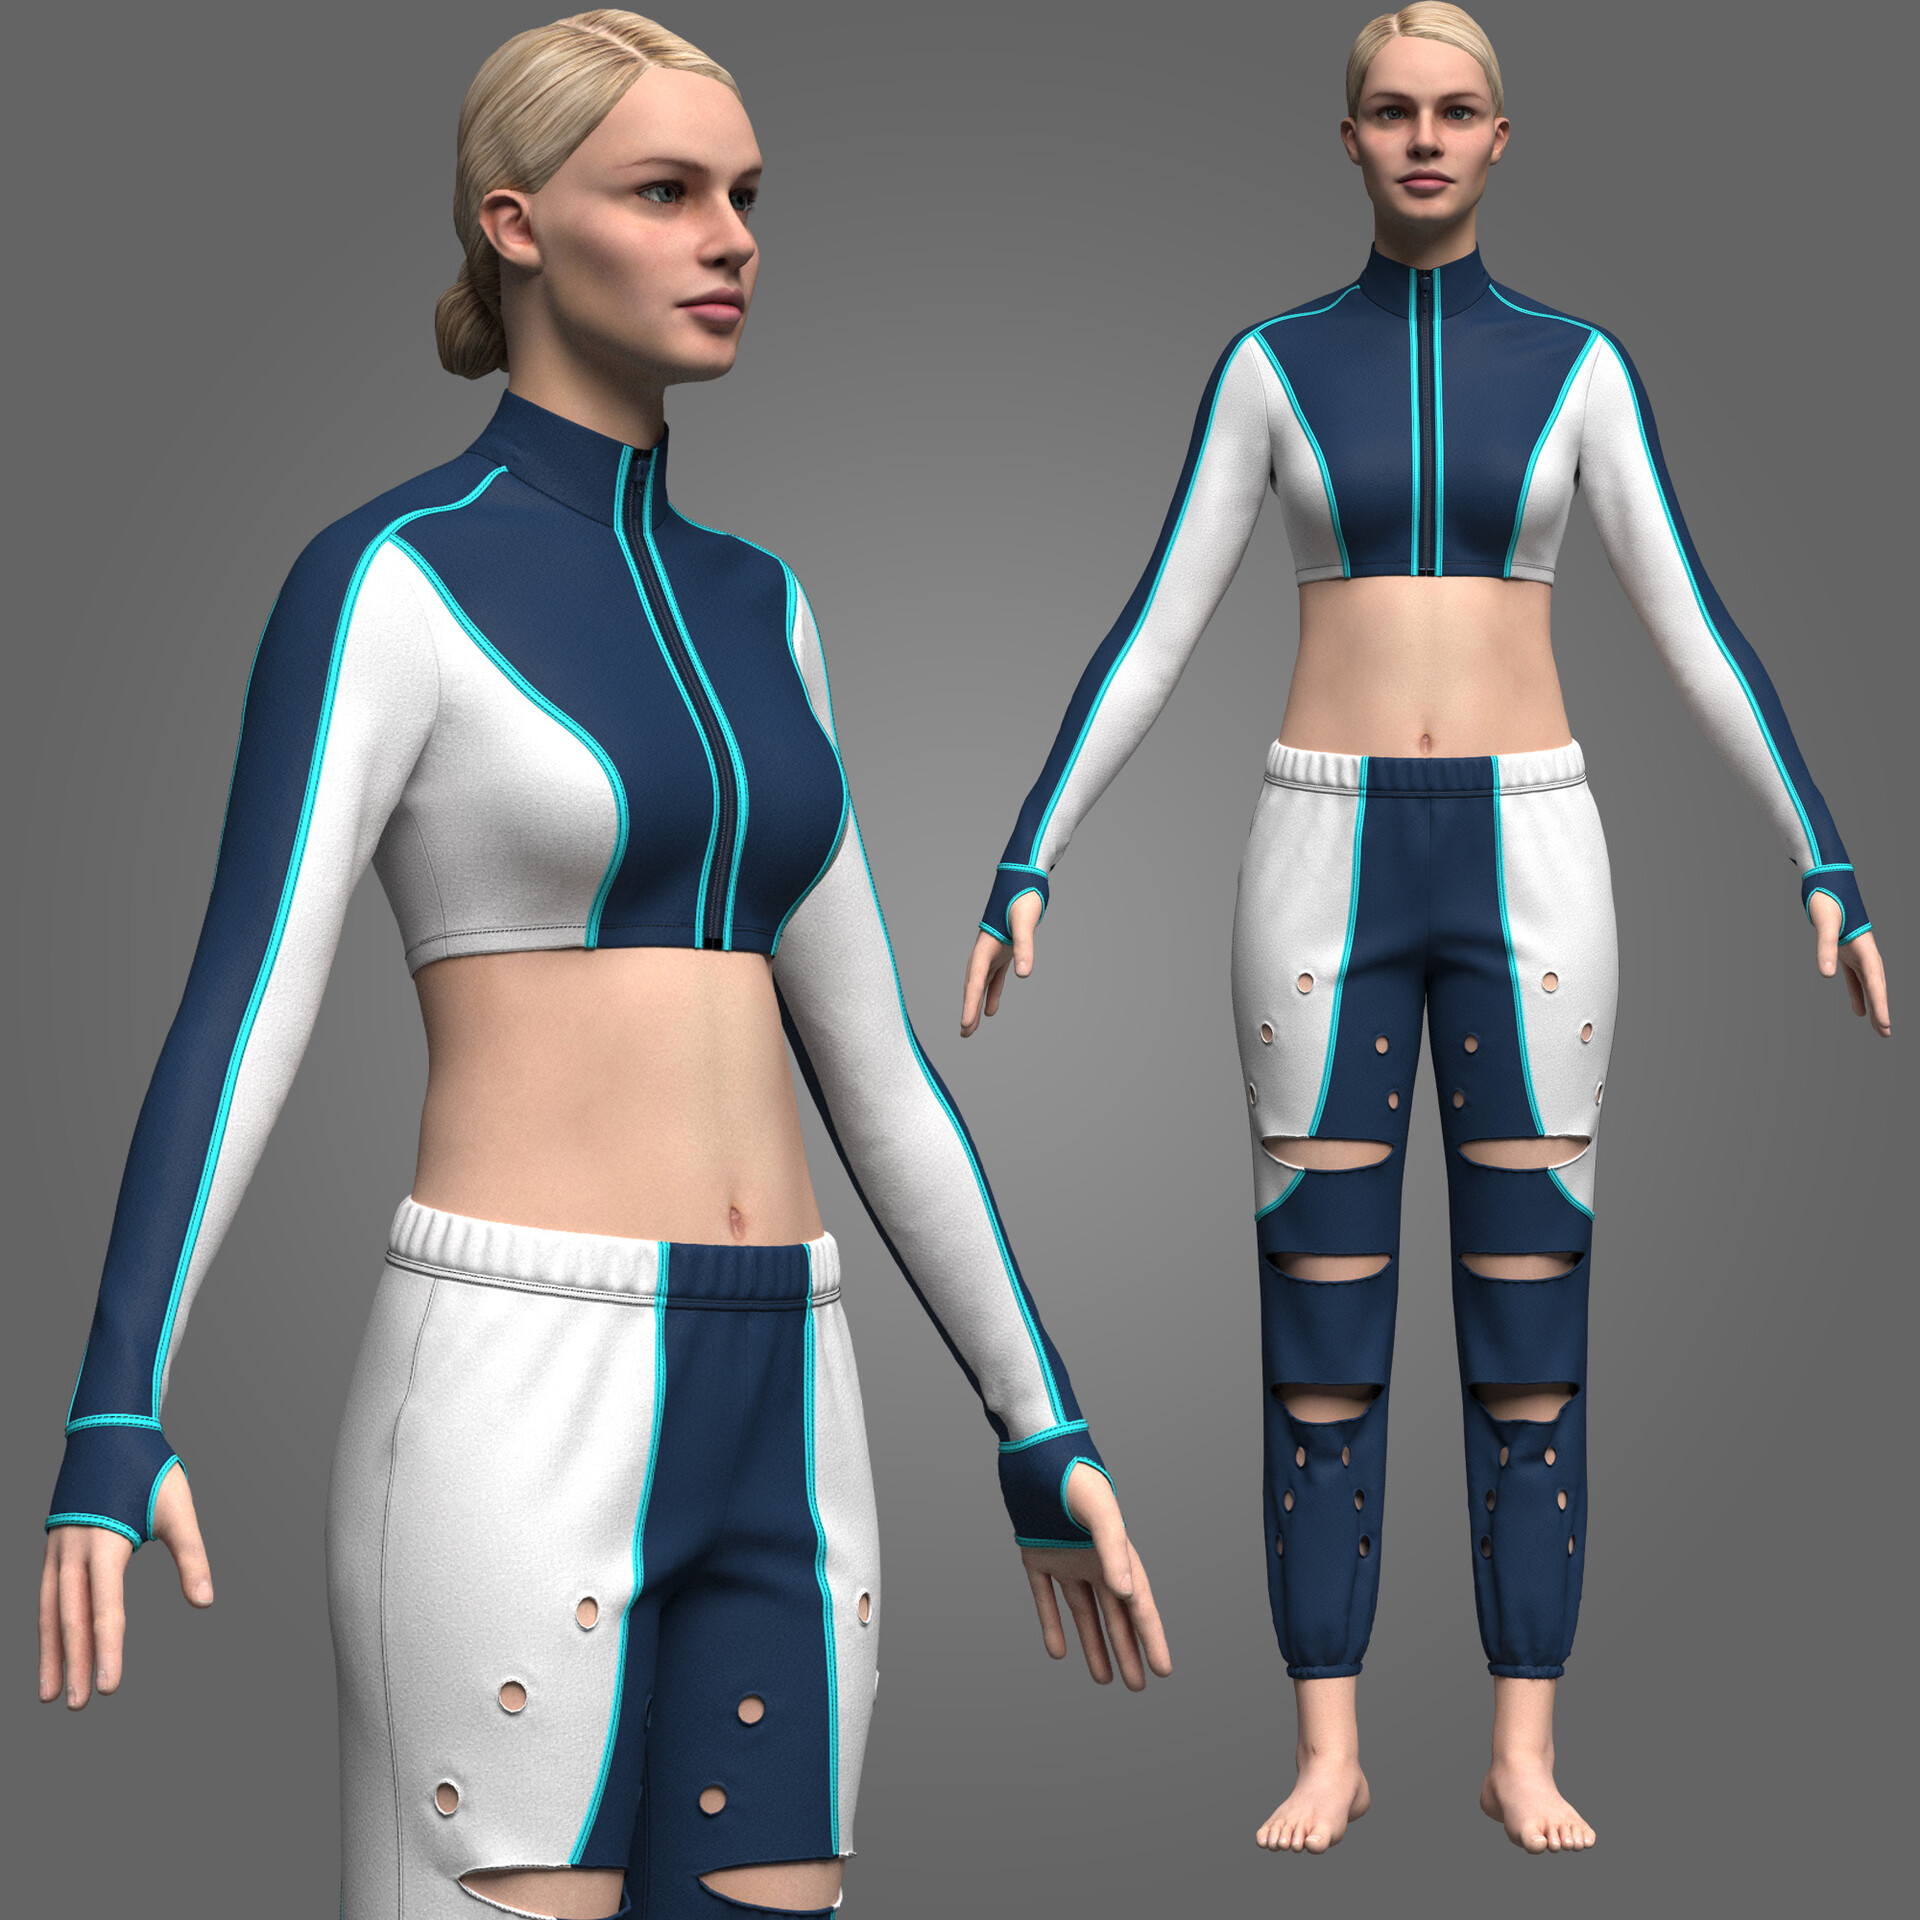 ArtStation - Casual_Outfit_3d_Model